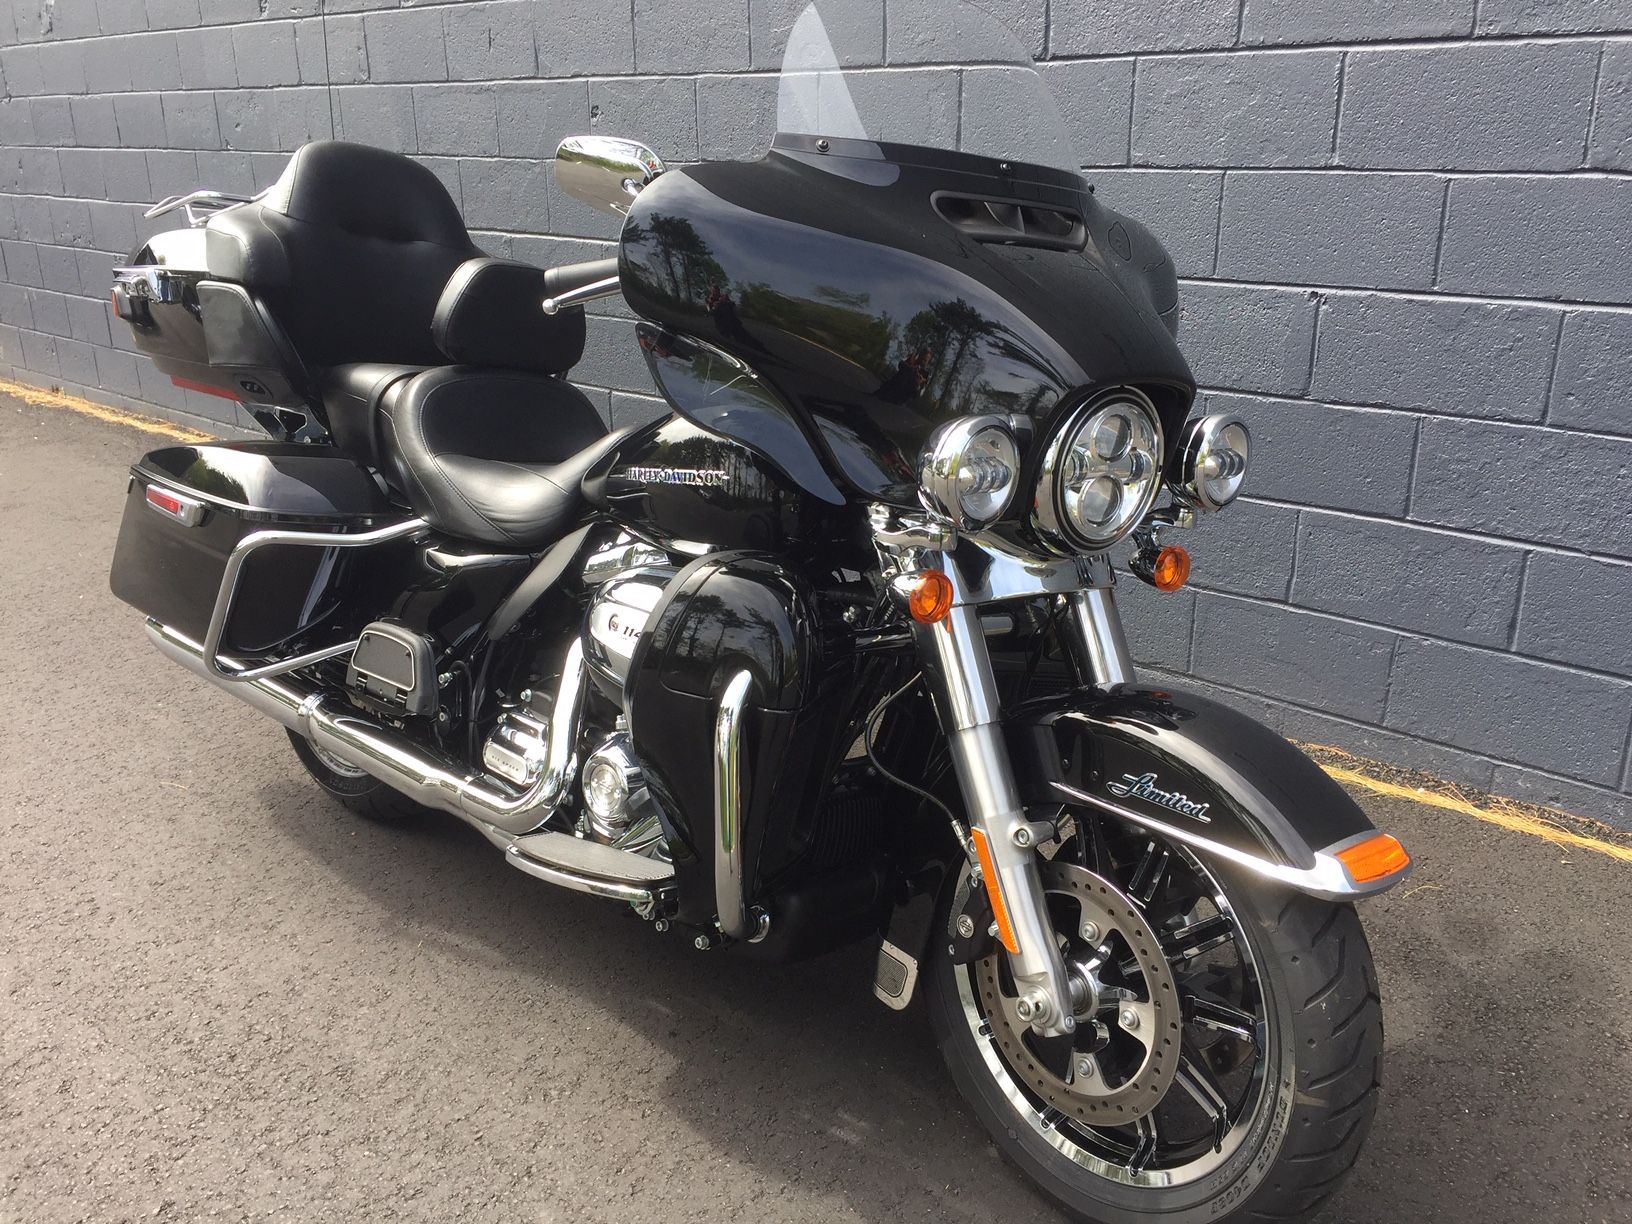 2019 Harley-Davidson ULTRA LIMITED in West Long Branch, New Jersey - Photo 2